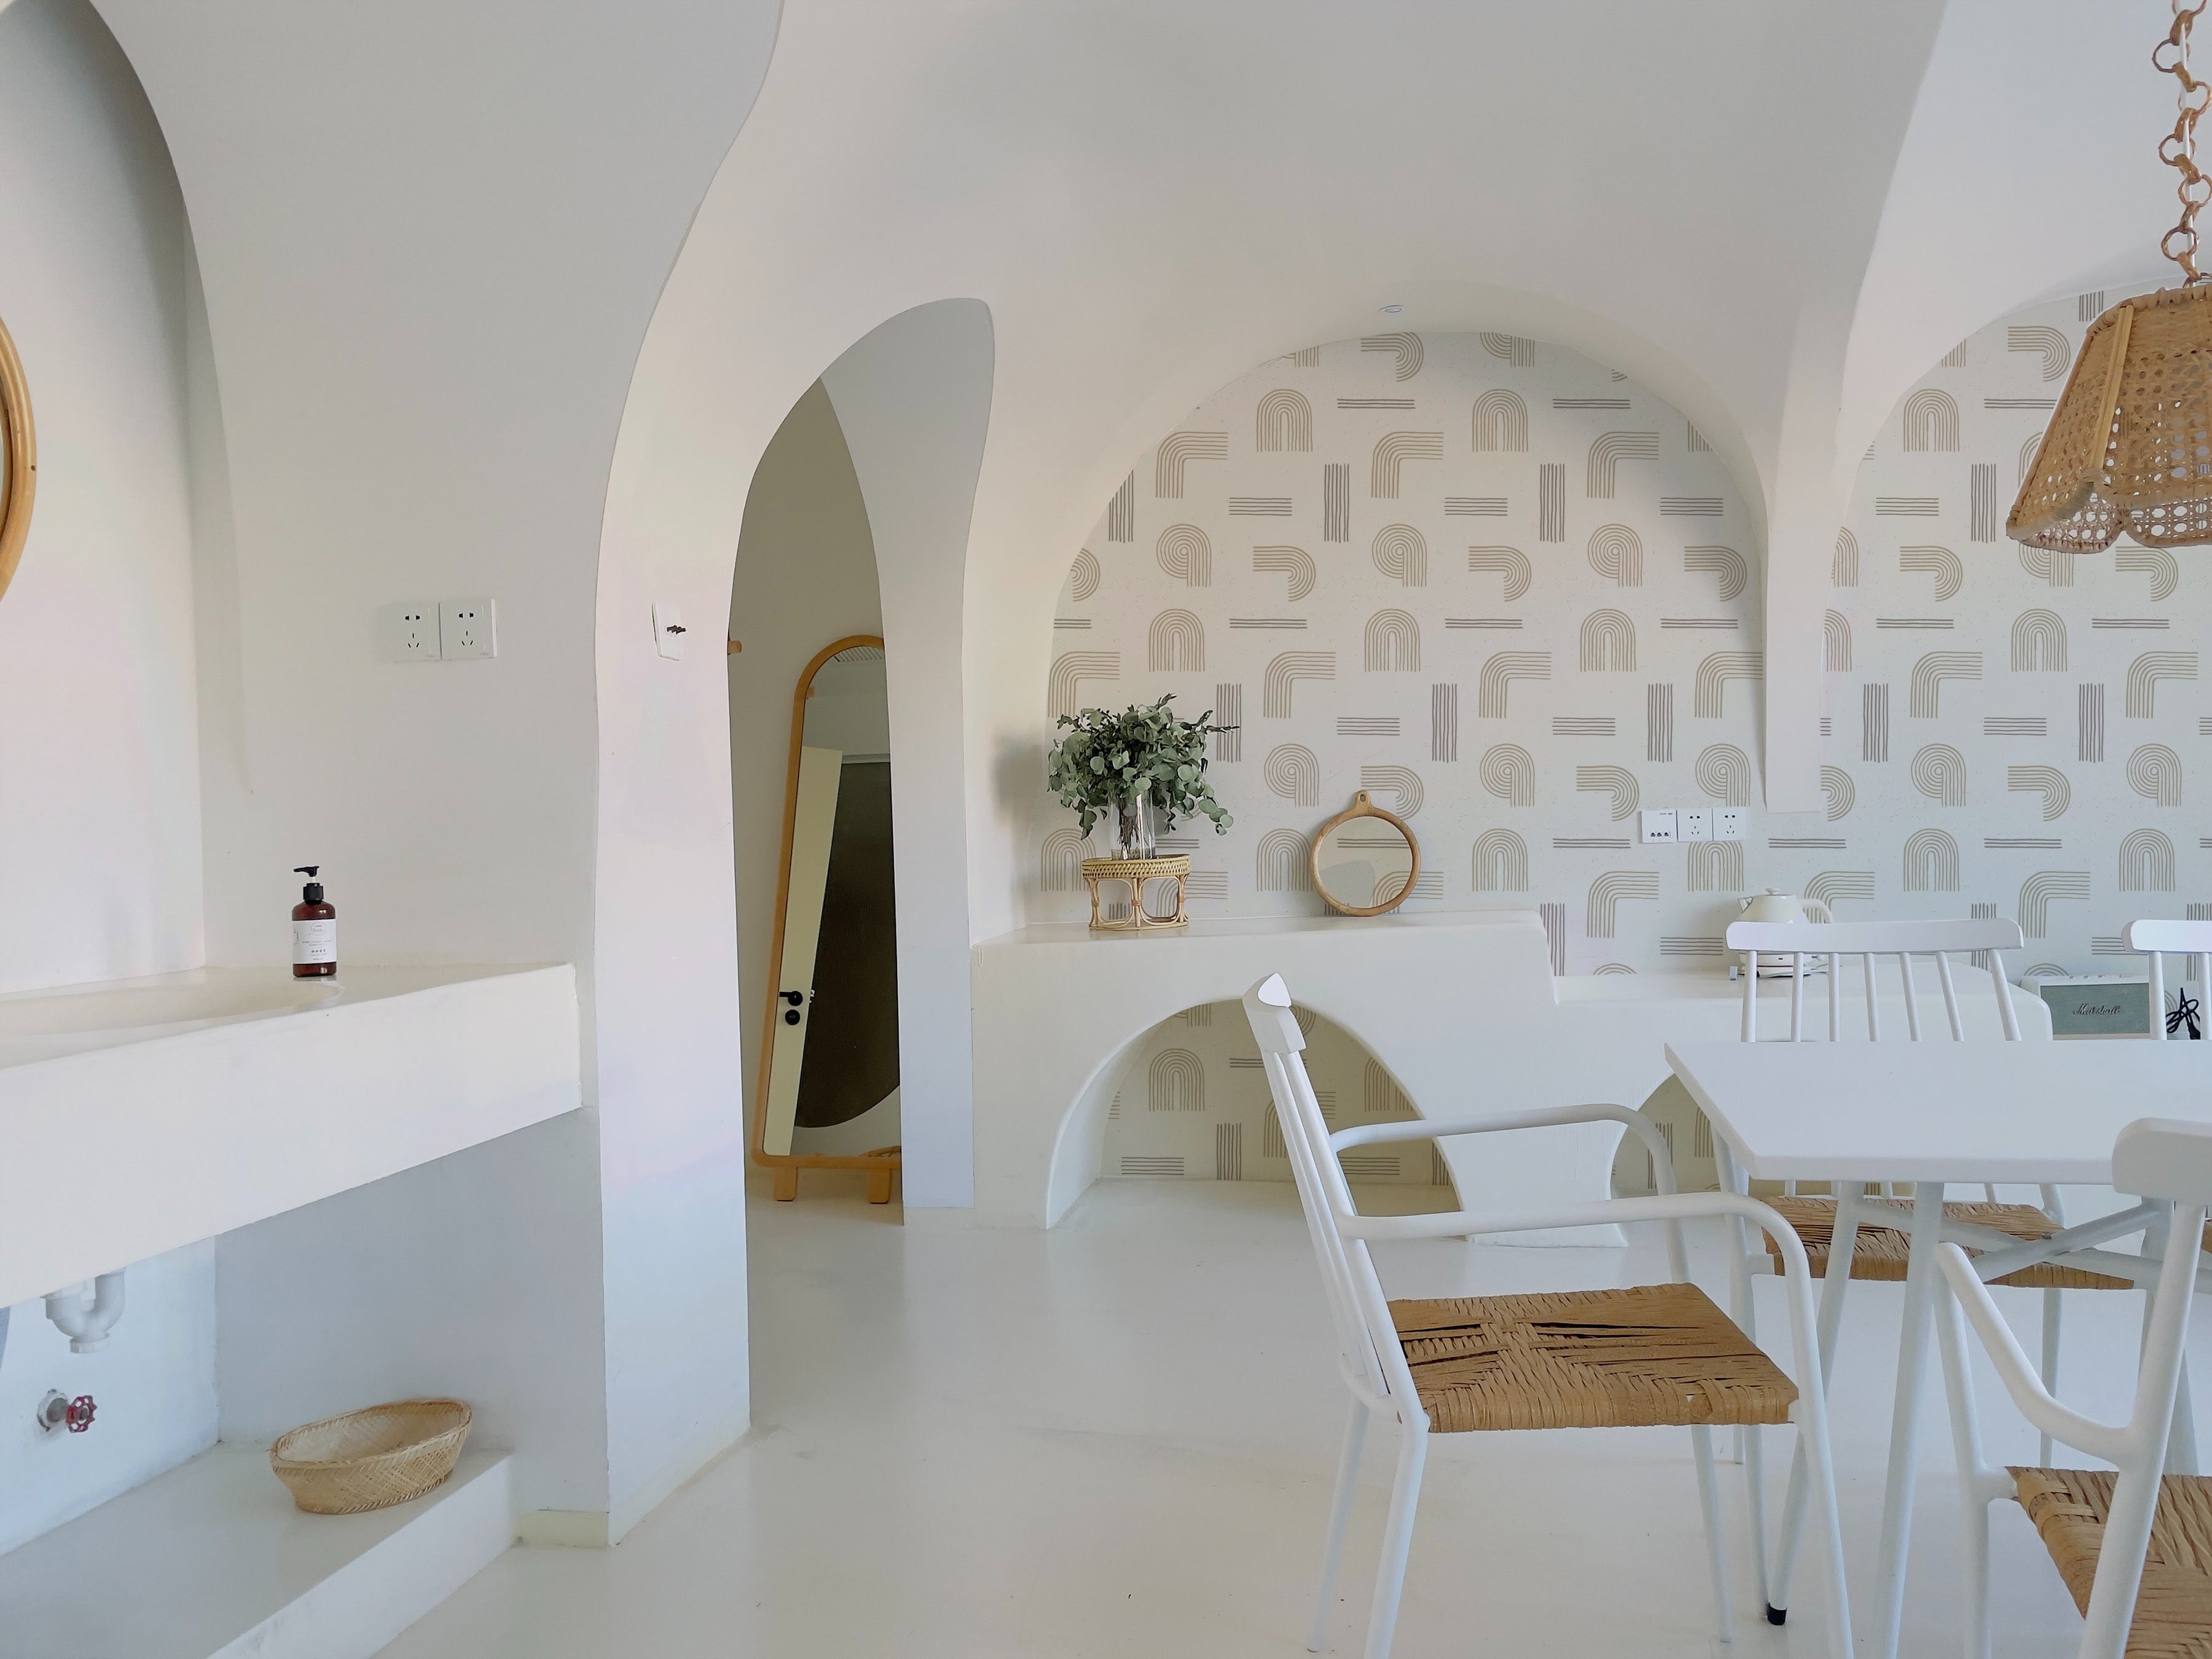 A bright and airy room decorated with Sand Zen Geometric Wallpaper - VII on the walls, complemented by white furnishings and natural wood accents. The space is styled with minimalist decor, including a white arch-shaped mirror and a small plant, creating a serene atmosphere.